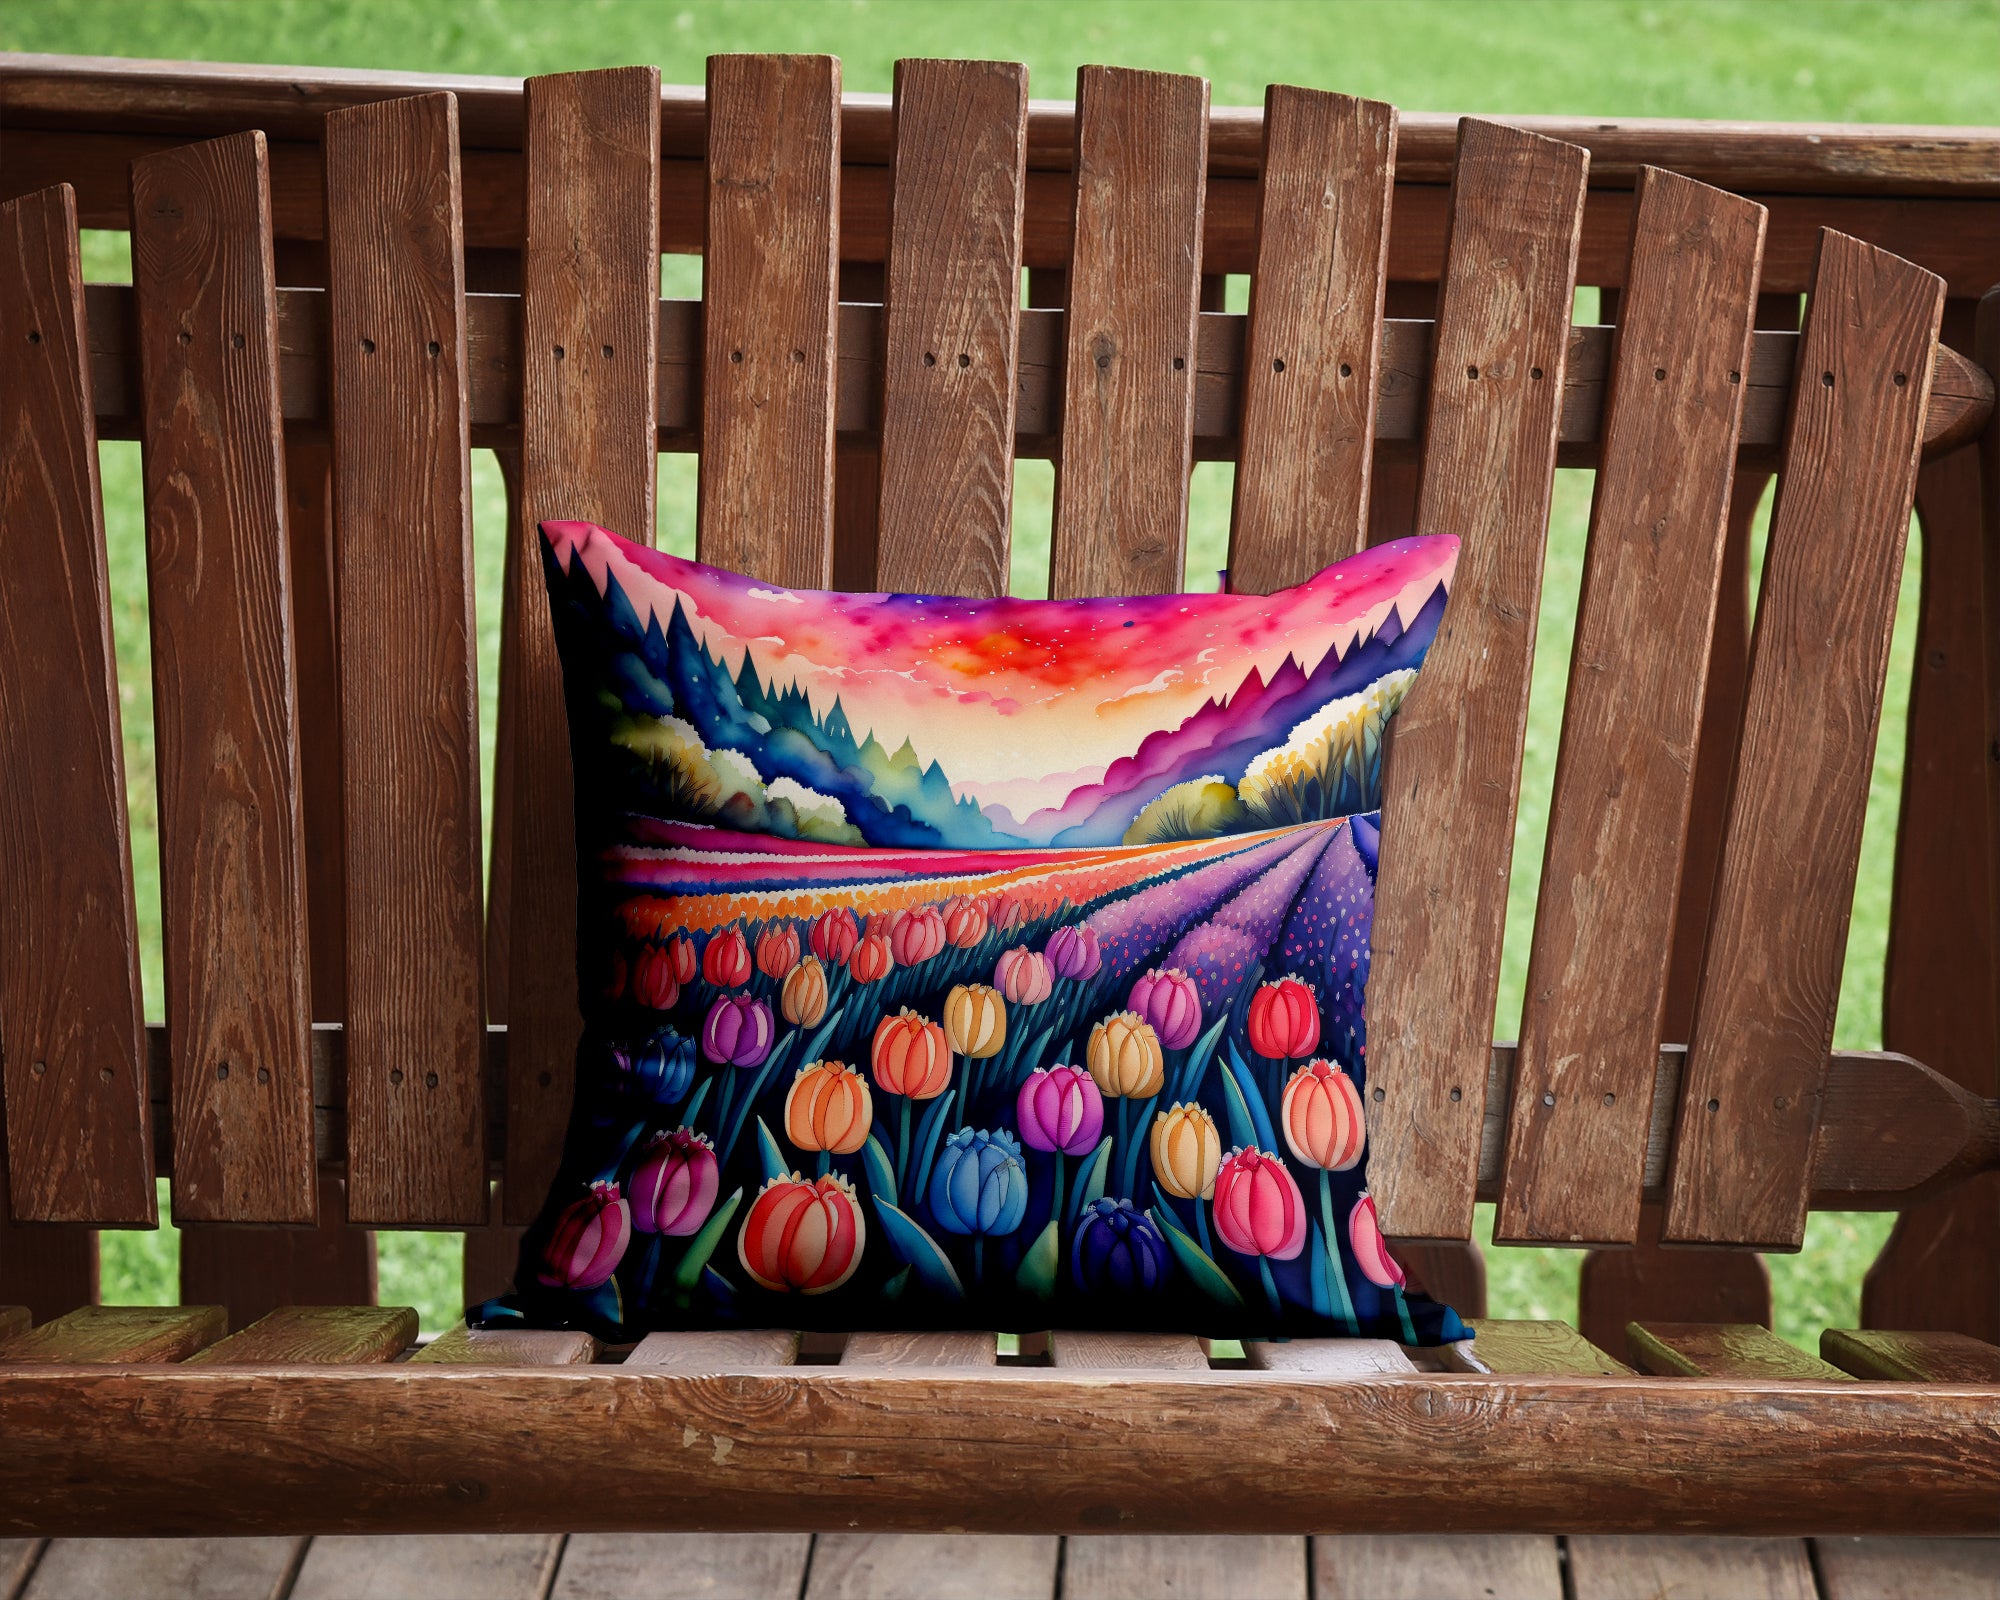 Buy this Colorful Hyacinths Fabric Decorative Pillow